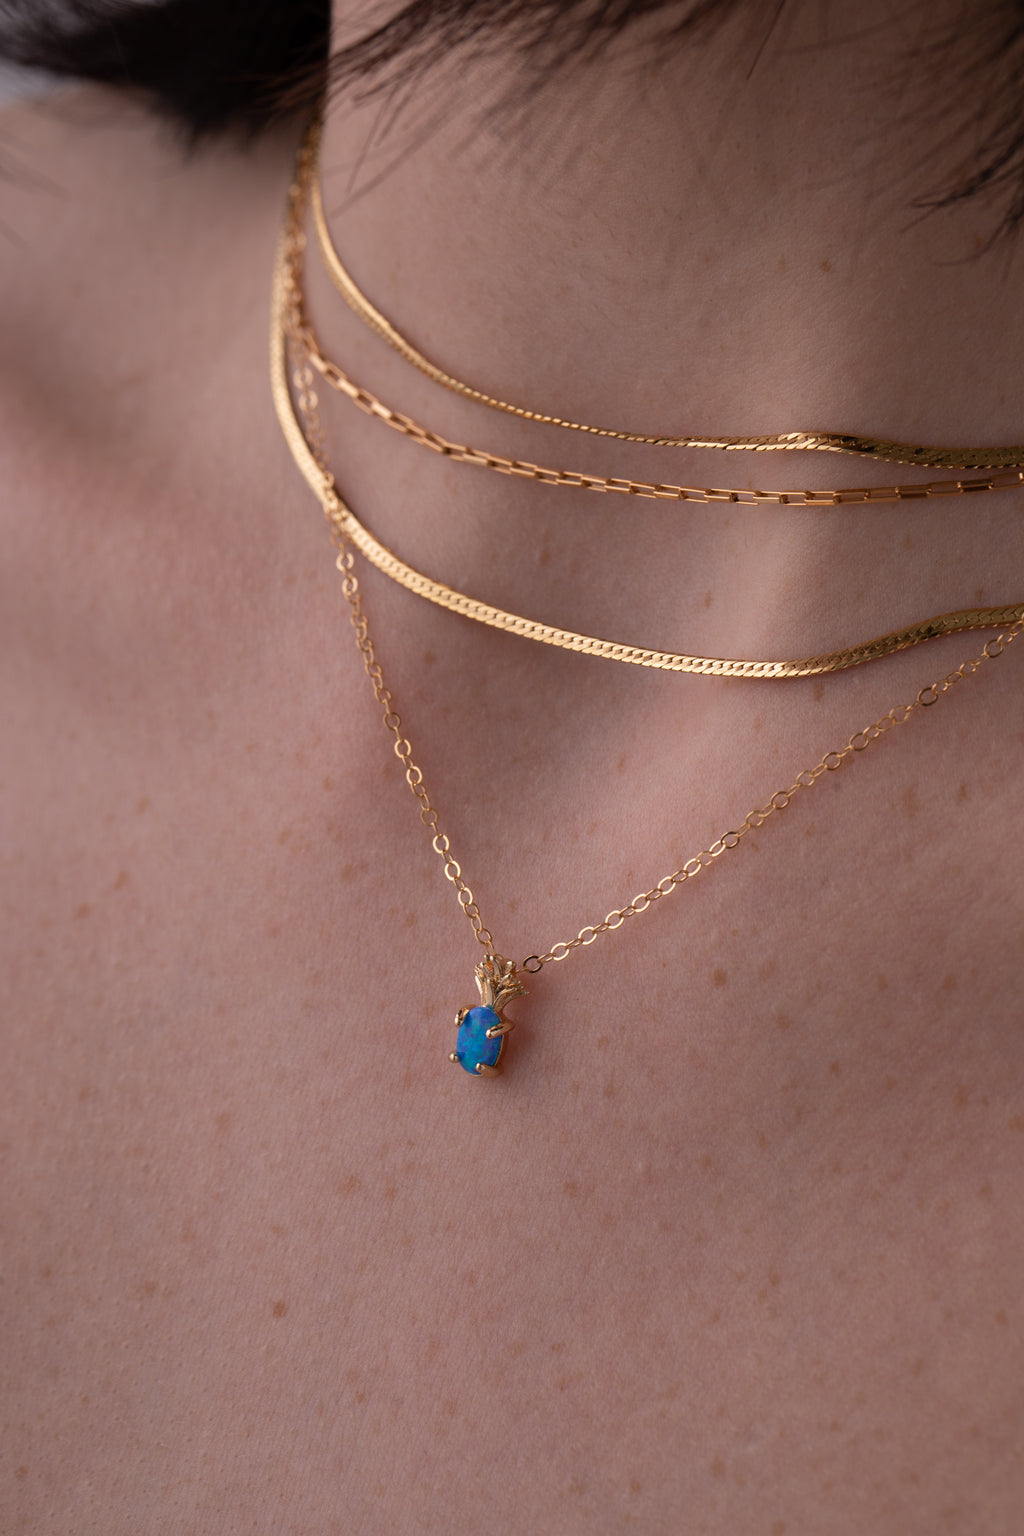 Blue Opal Pineapple Necklace